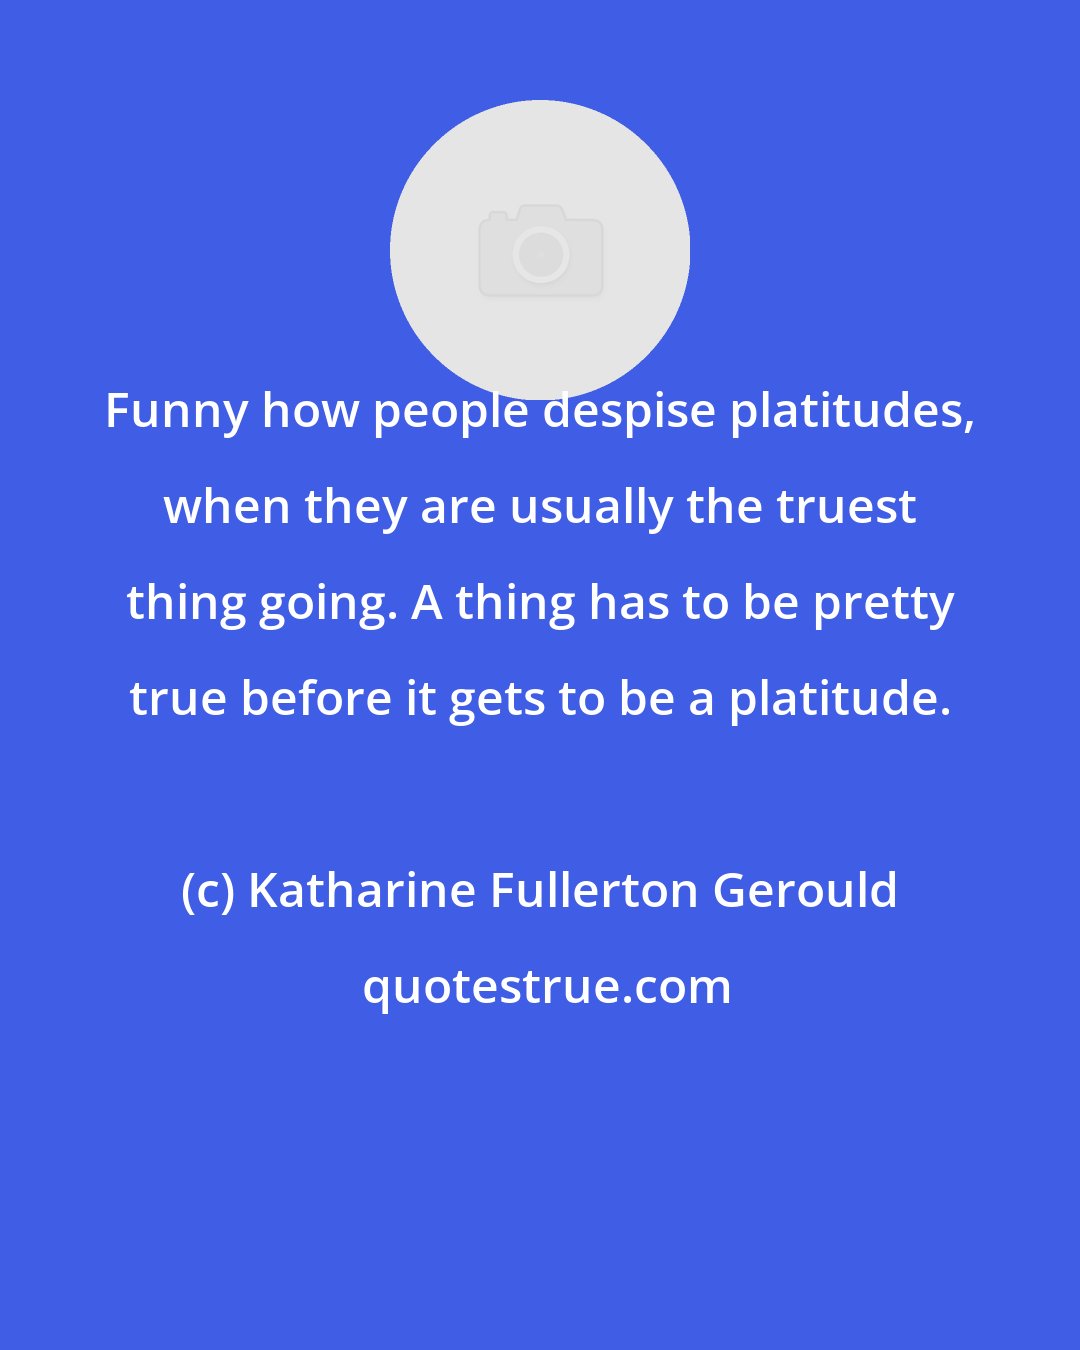 Katharine Fullerton Gerould: Funny how people despise platitudes, when they are usually the truest thing going. A thing has to be pretty true before it gets to be a platitude.